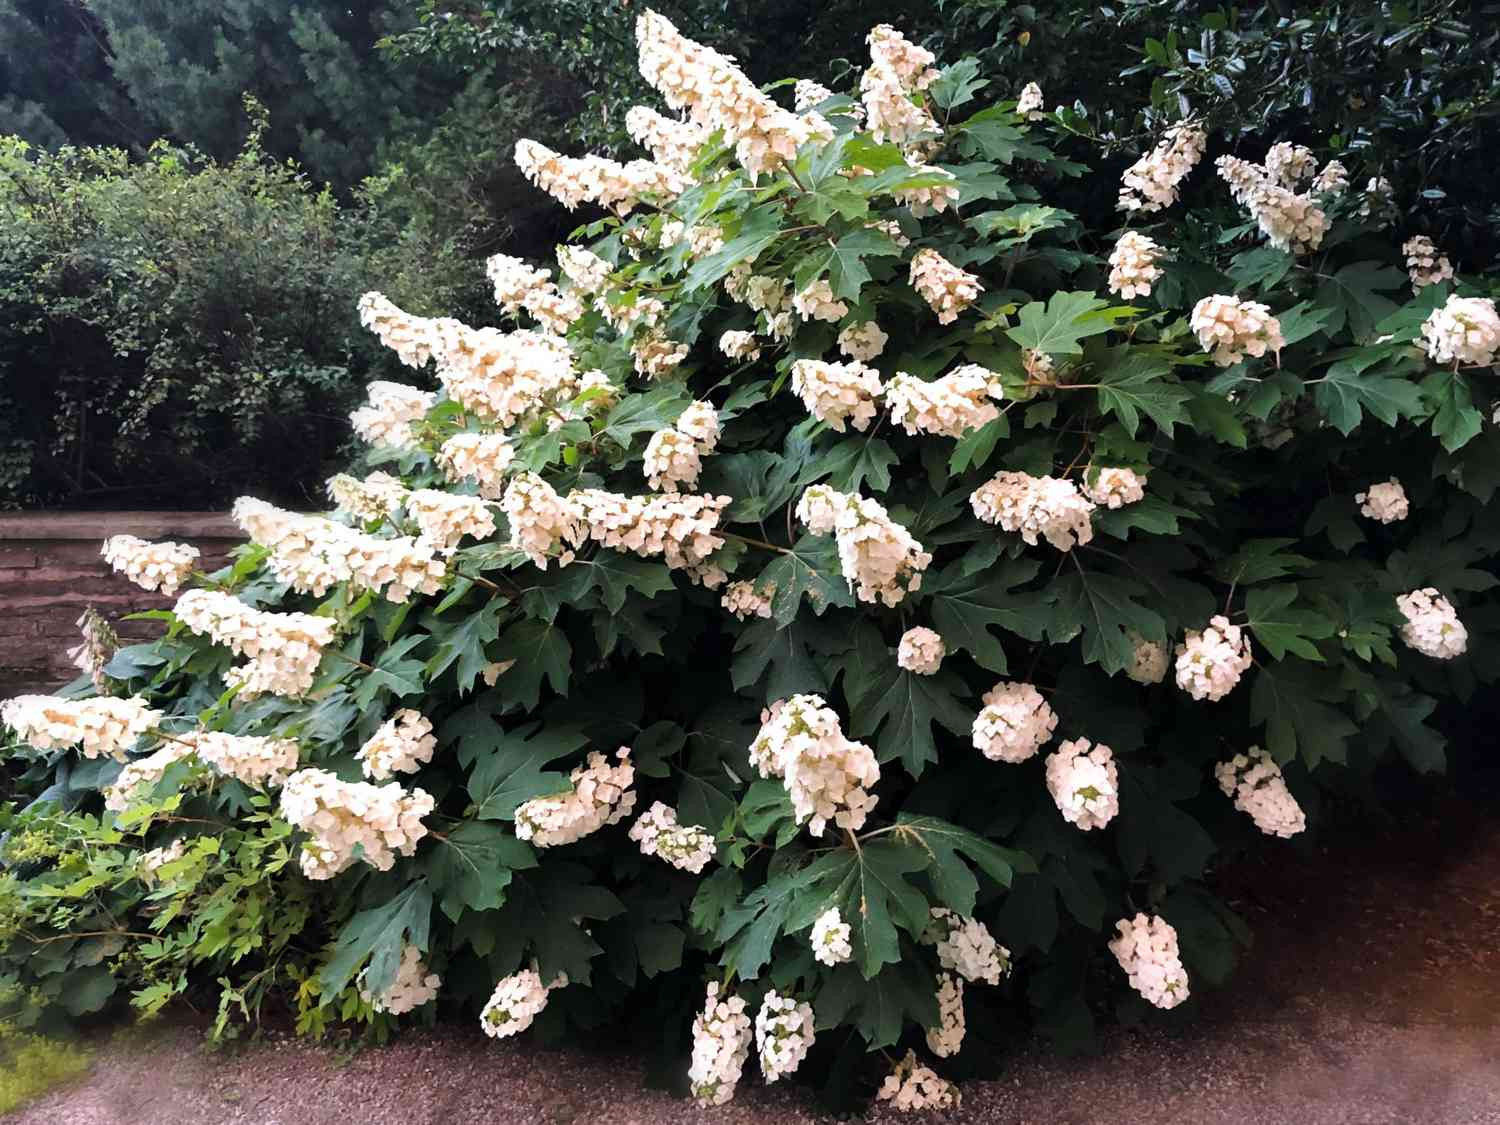 Growing Oakleaf Hydrangeas: Tips For Creating Your Best Blooms